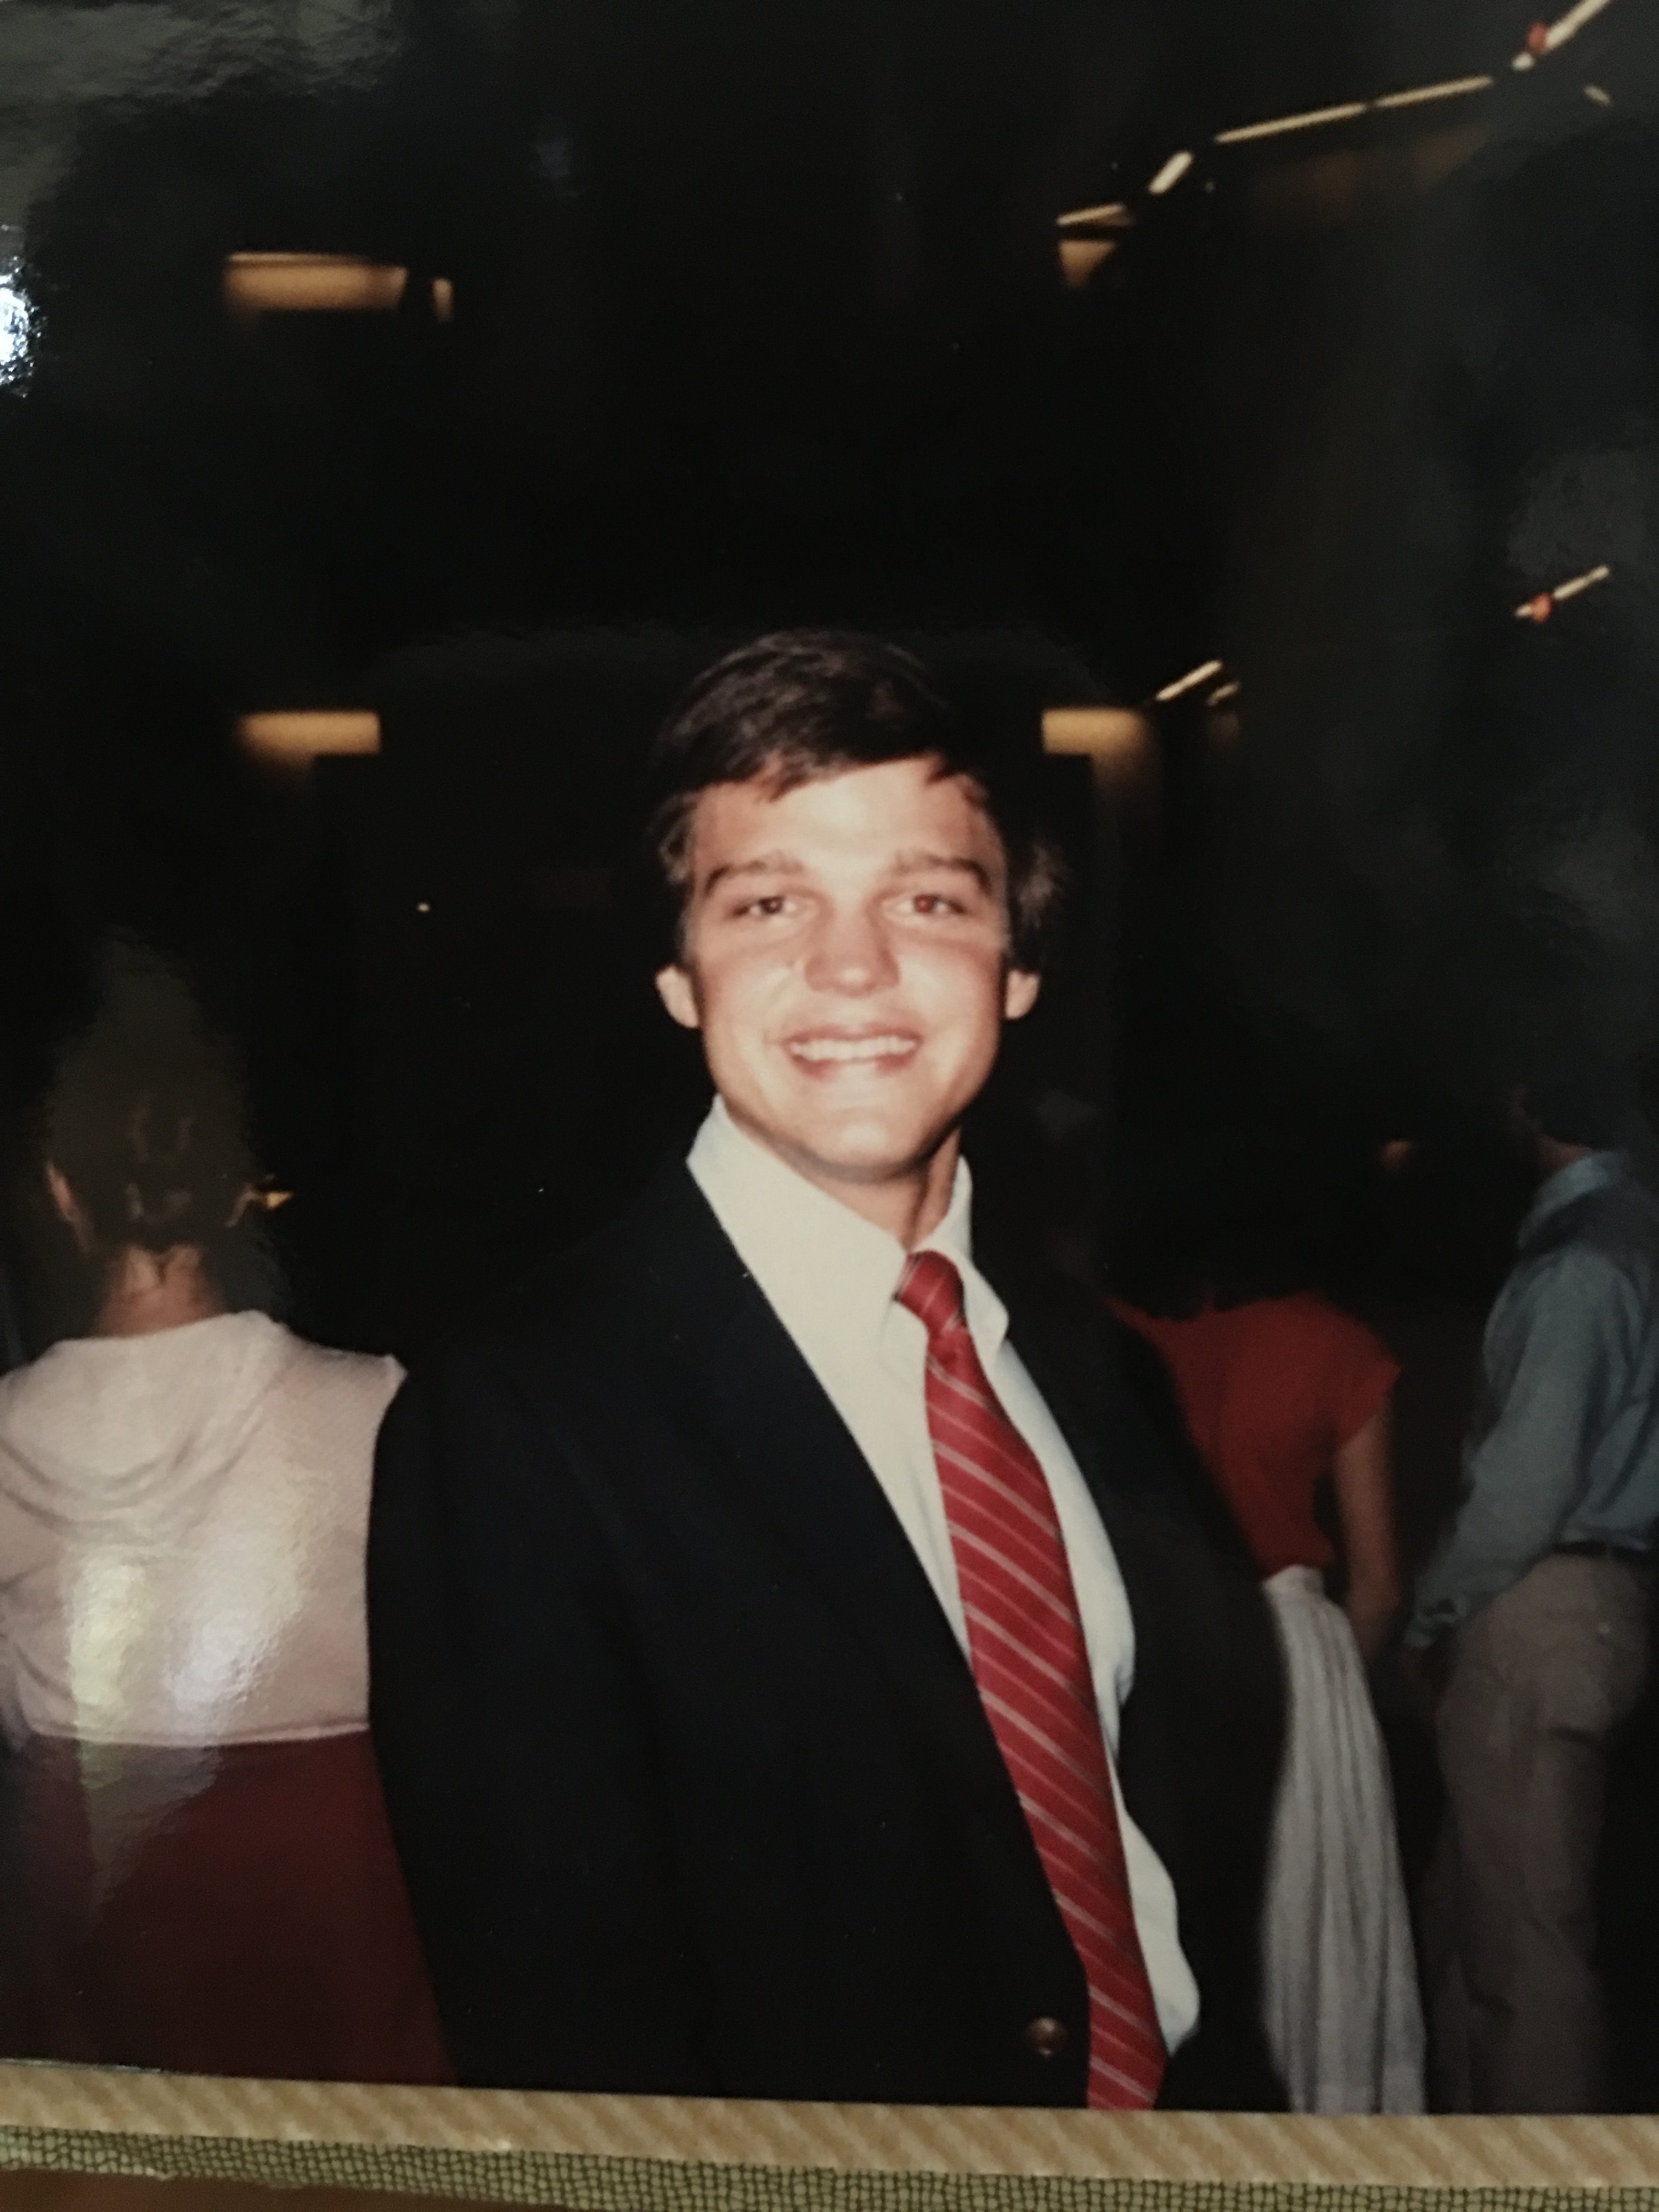 Douglas Brinkley as a young man